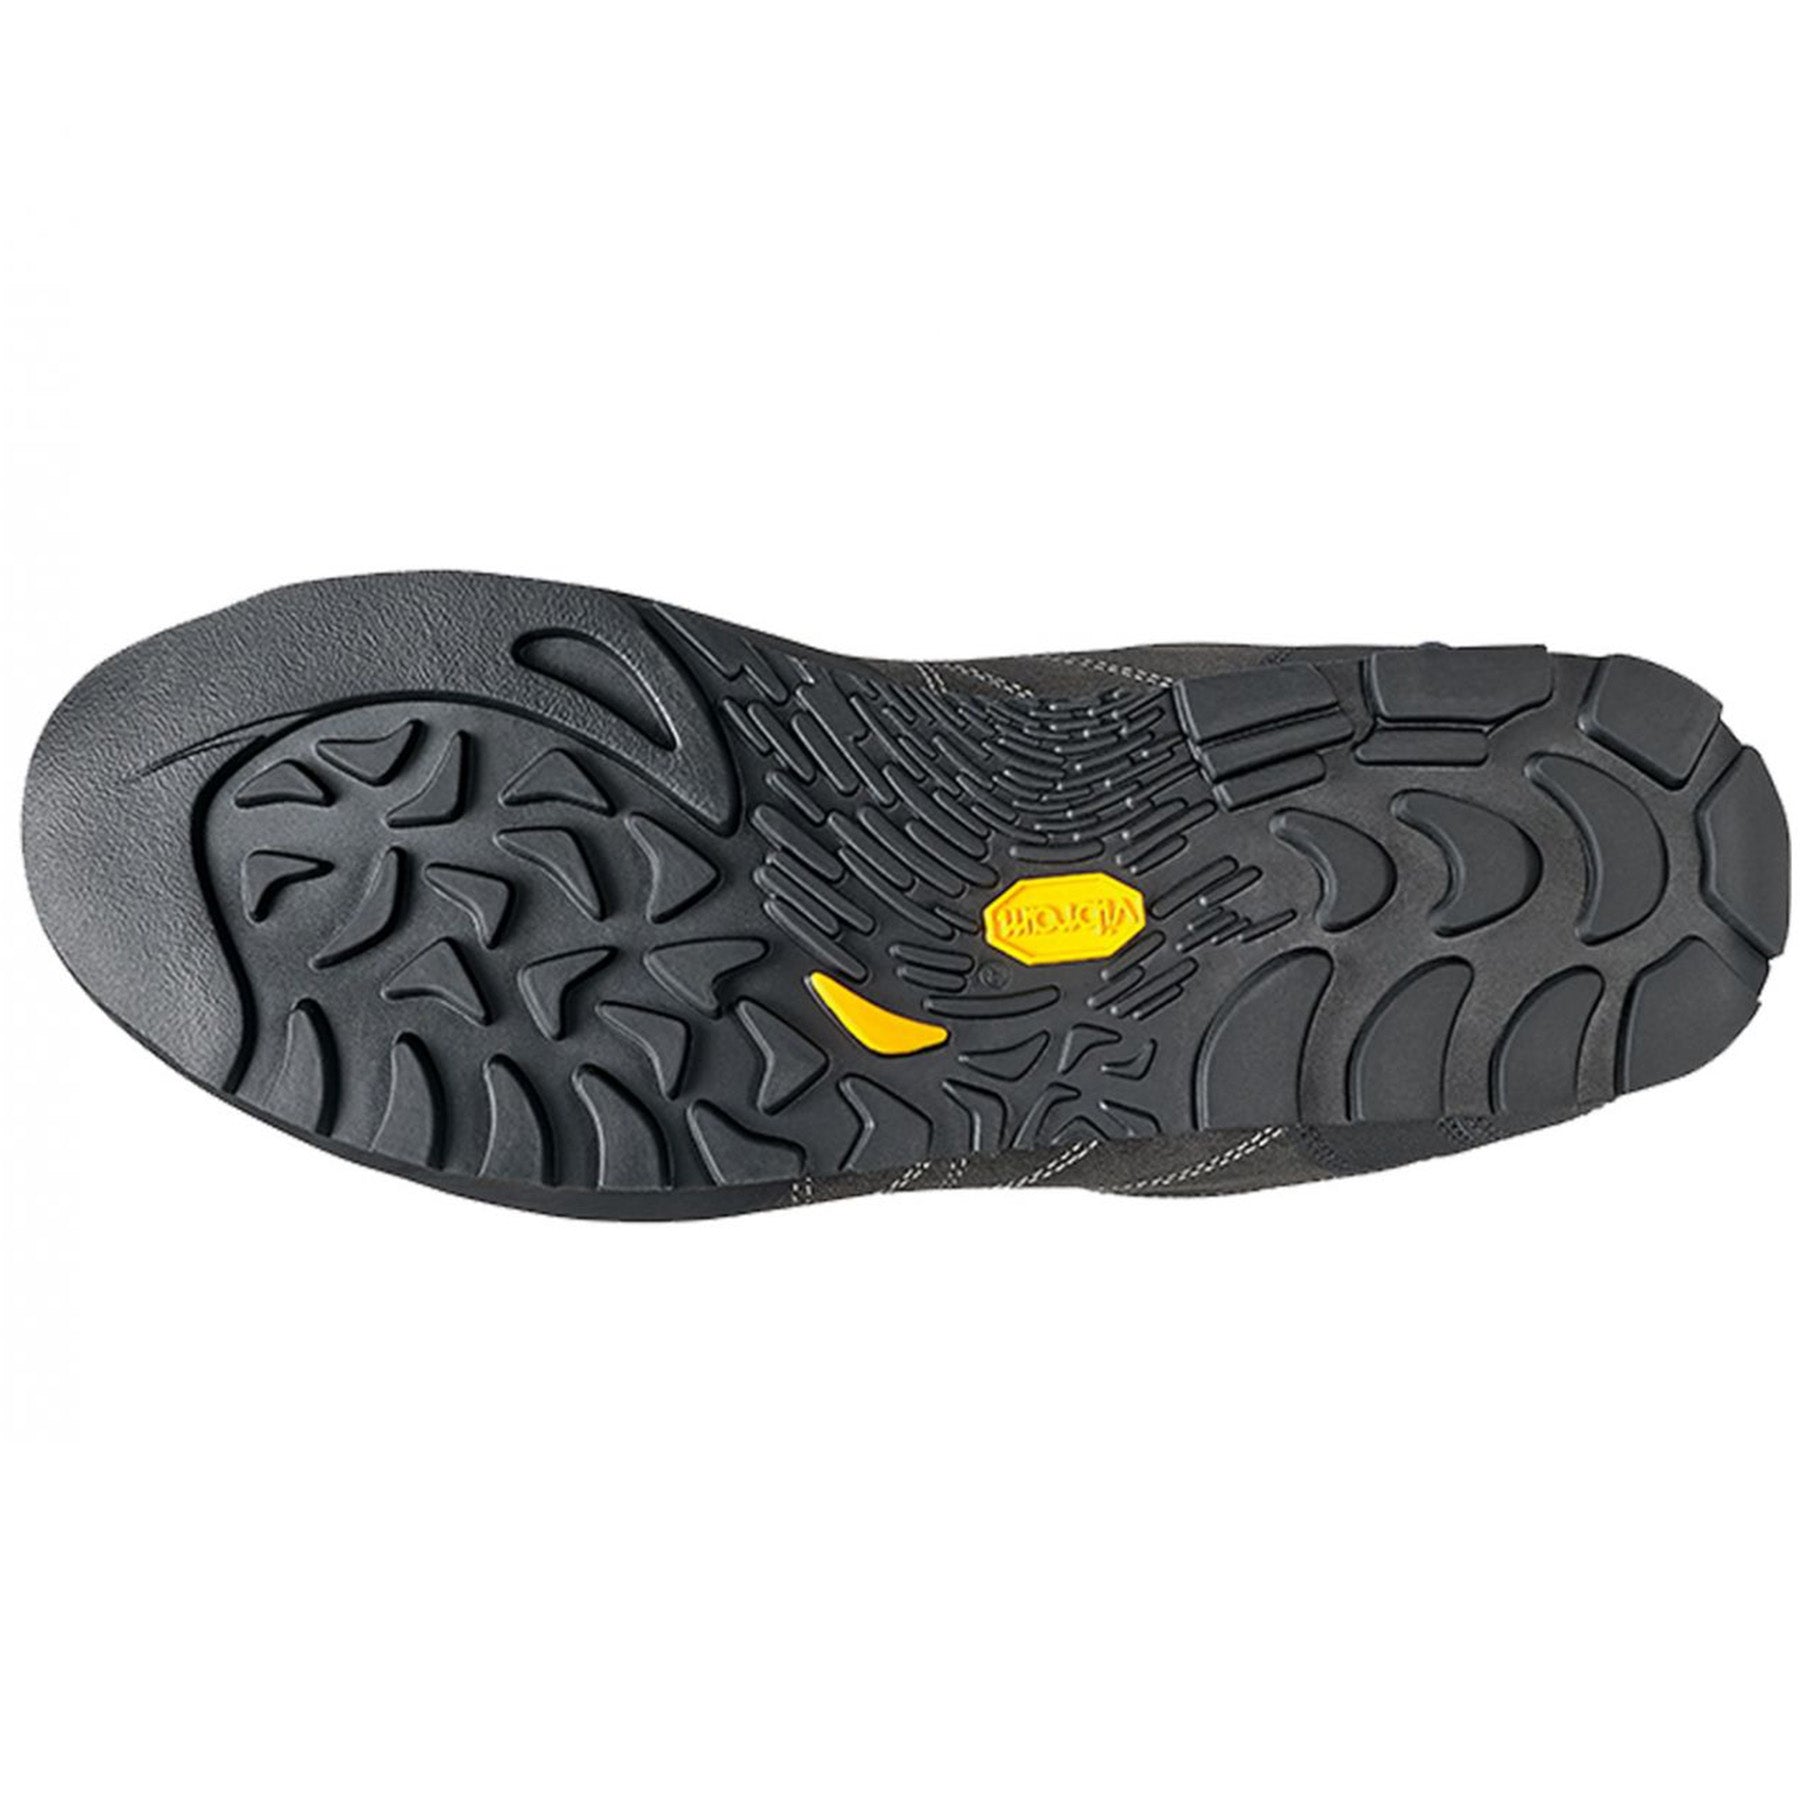 a view of the sole of the men's crux approach shoe